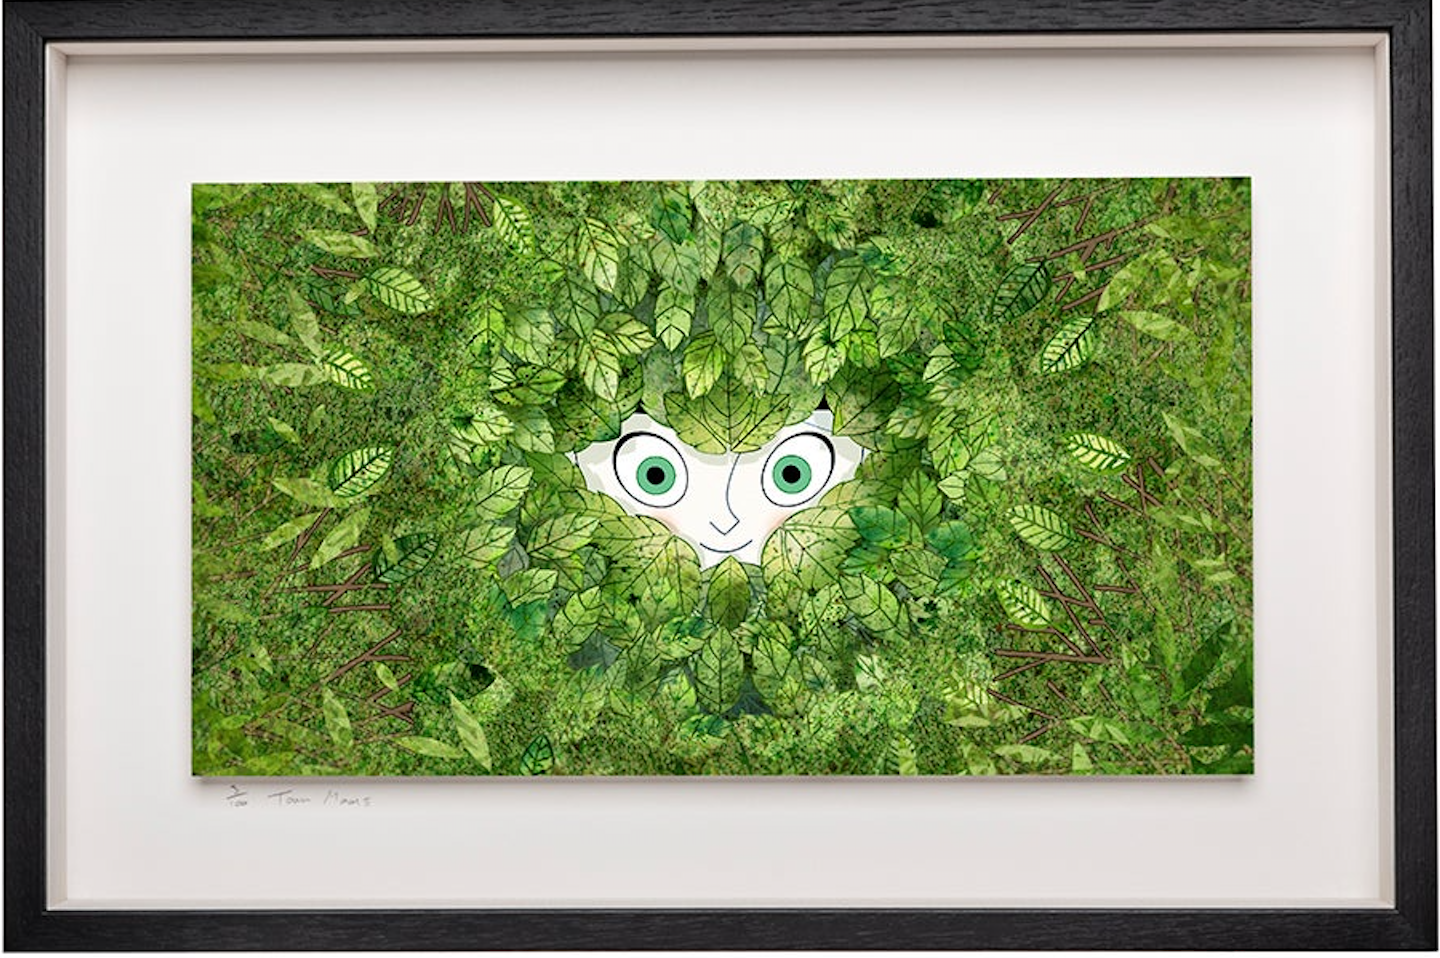 Aisling's Eyes - Limited Edition Signed Print - Framed